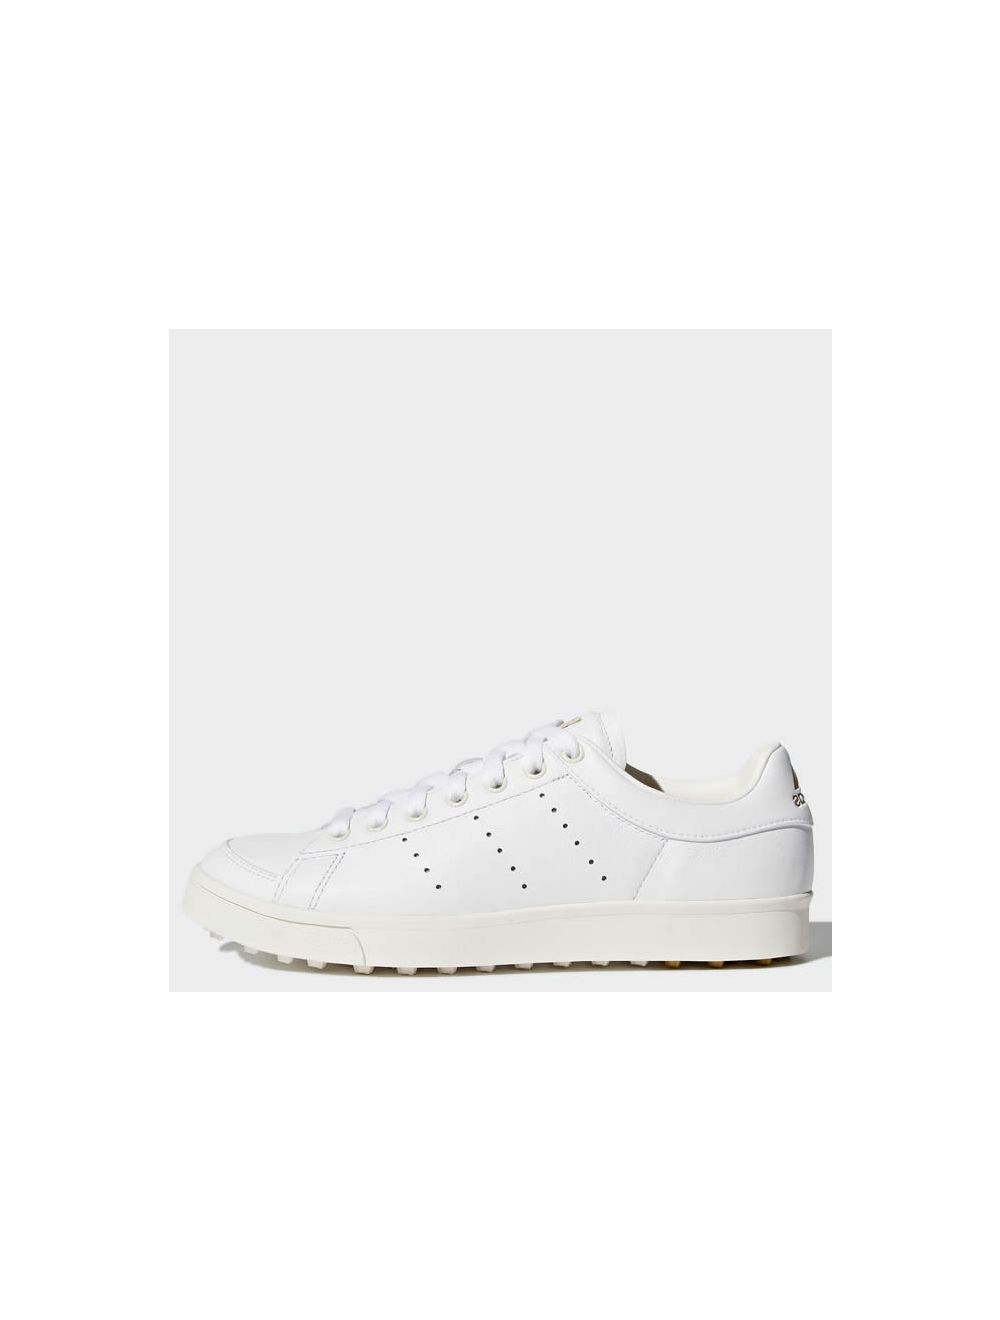 adidas womens shoes classic